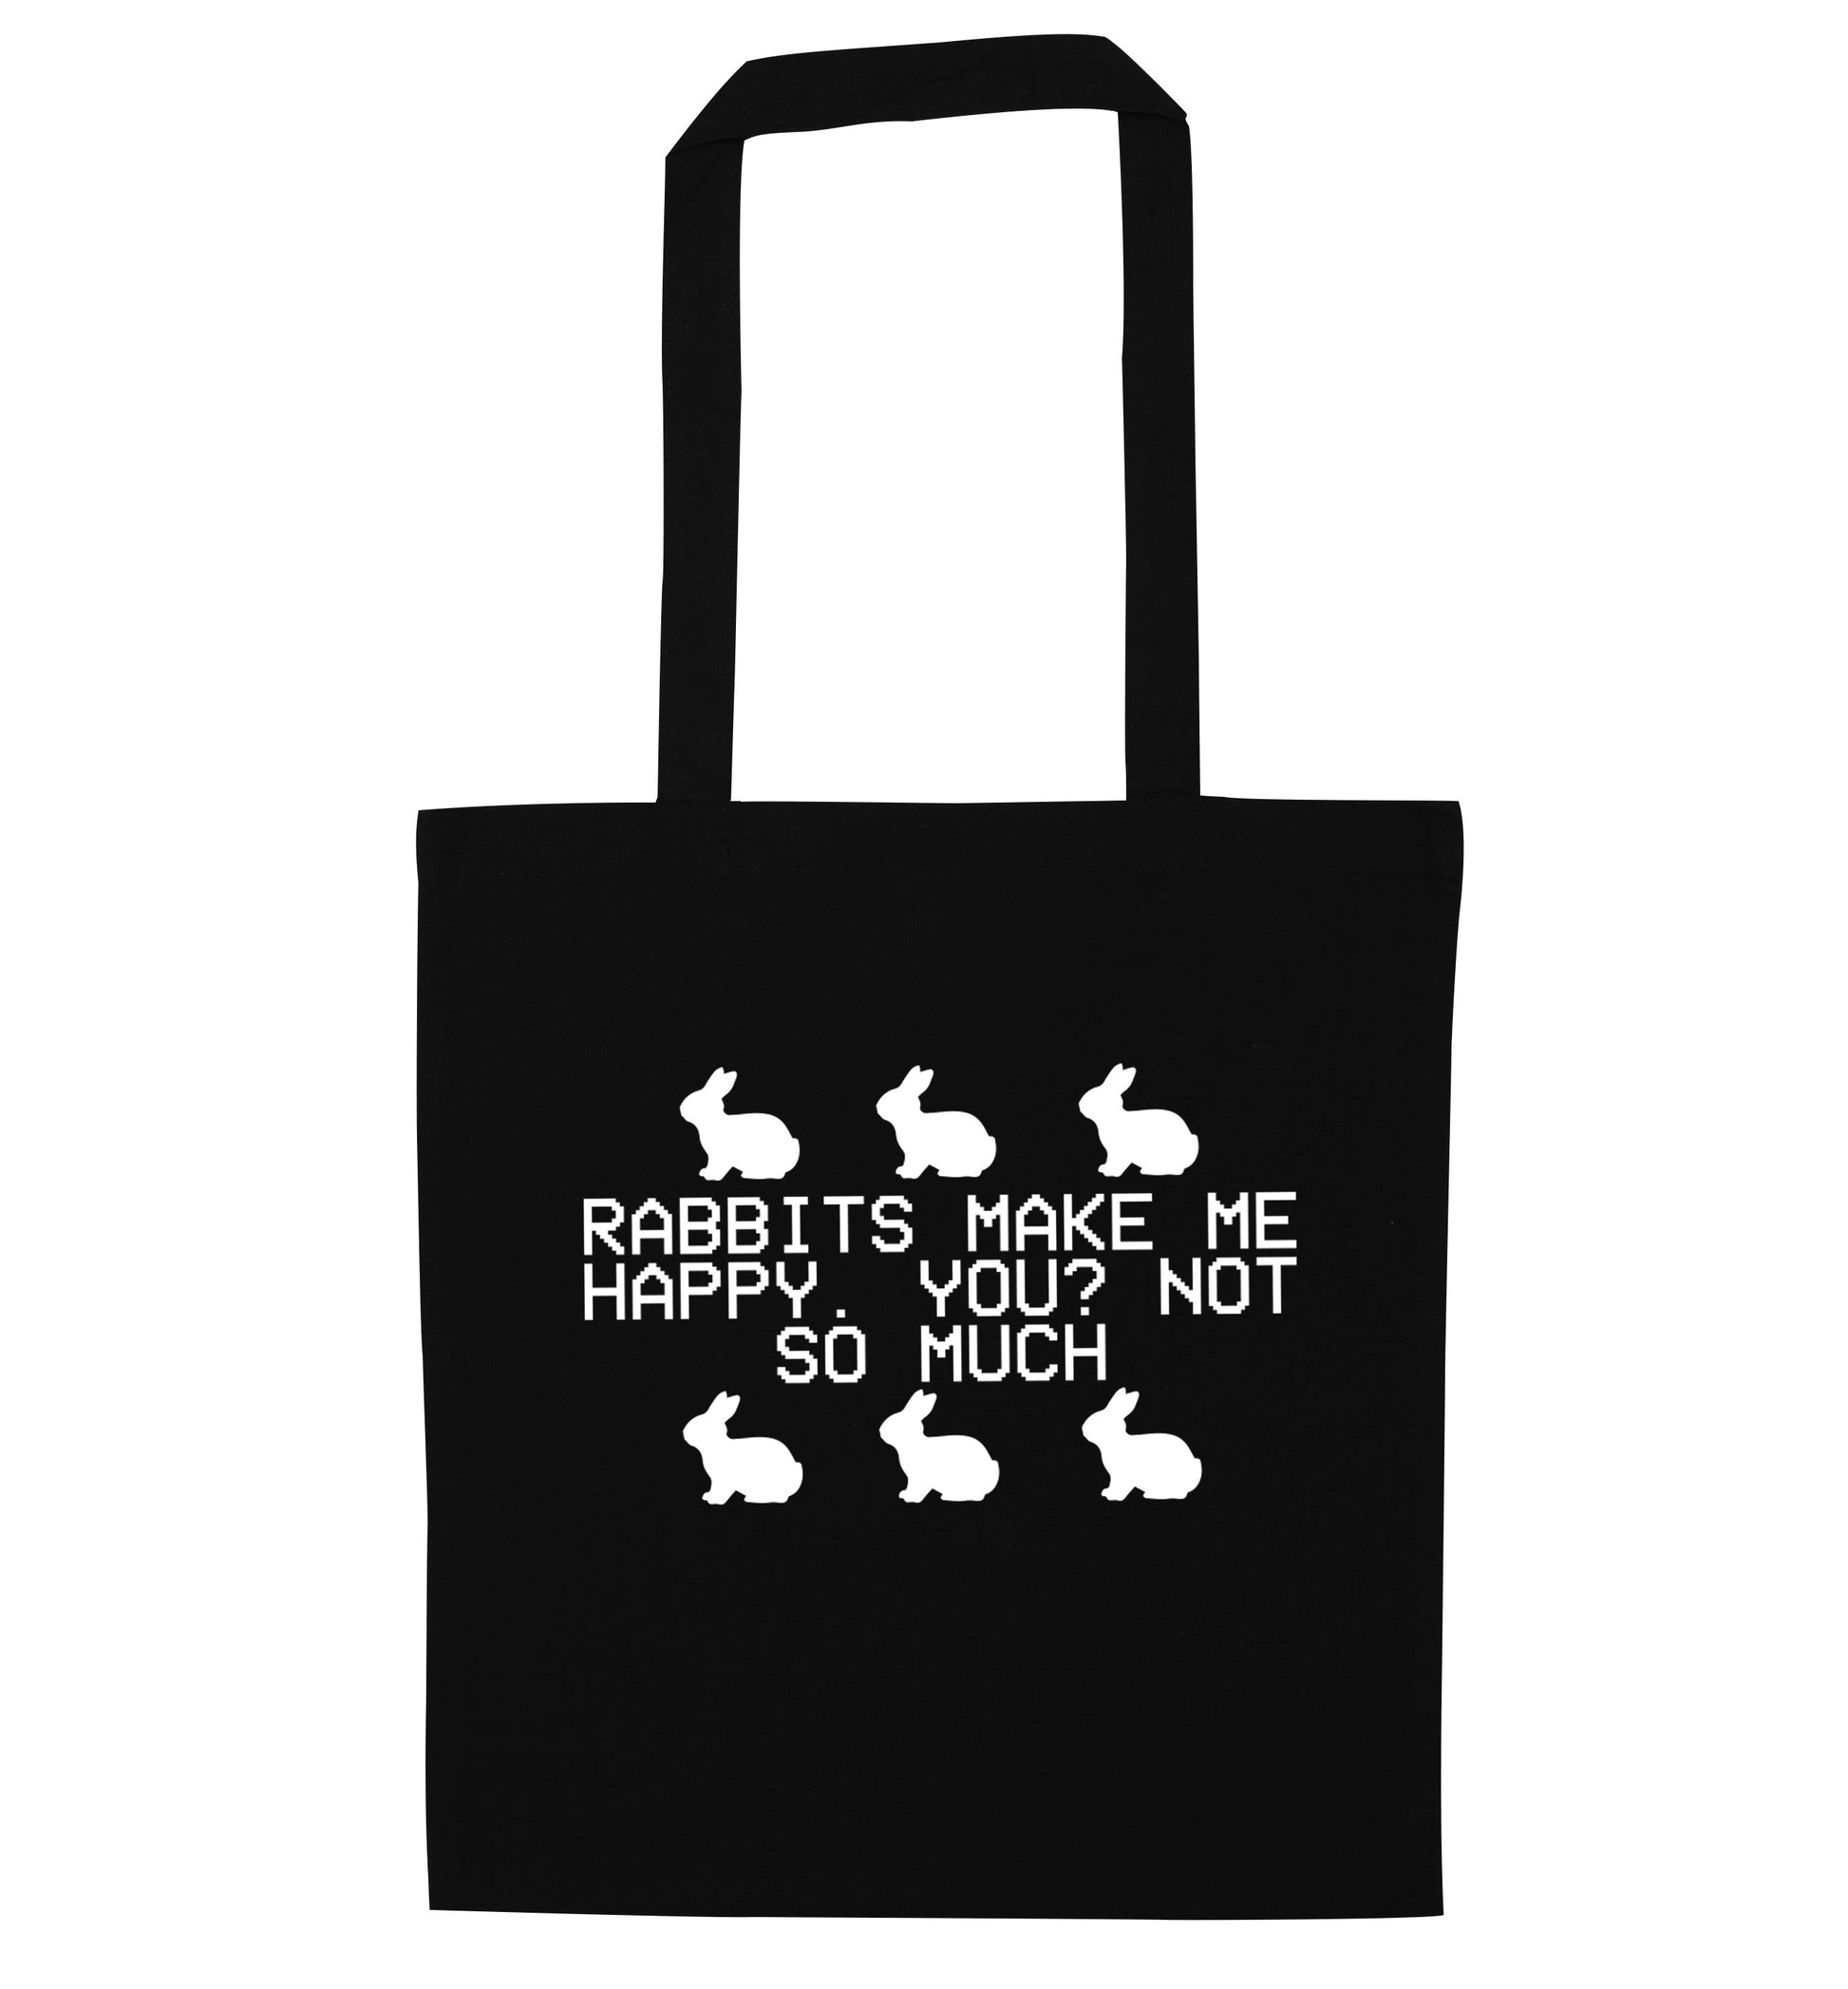 Rabbits make me happy, you not so much black tote bag